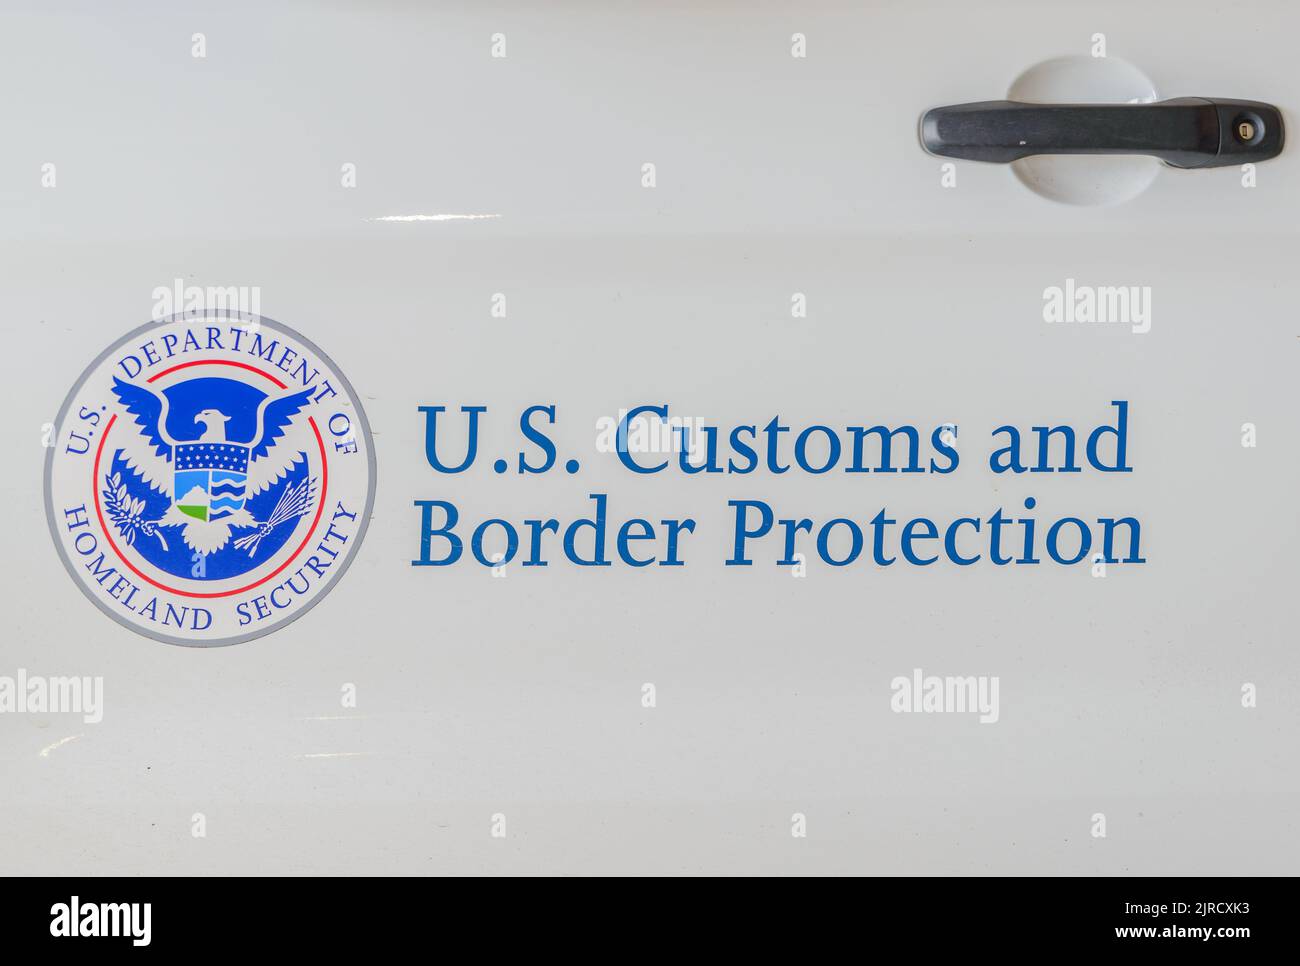 NEW ORLEANS, LA, USA - APRIL 24, 2022: Agency logo and name on side of vehicle for U.S. Customs and Border Protection, Department of Homeland Security Stock Photo